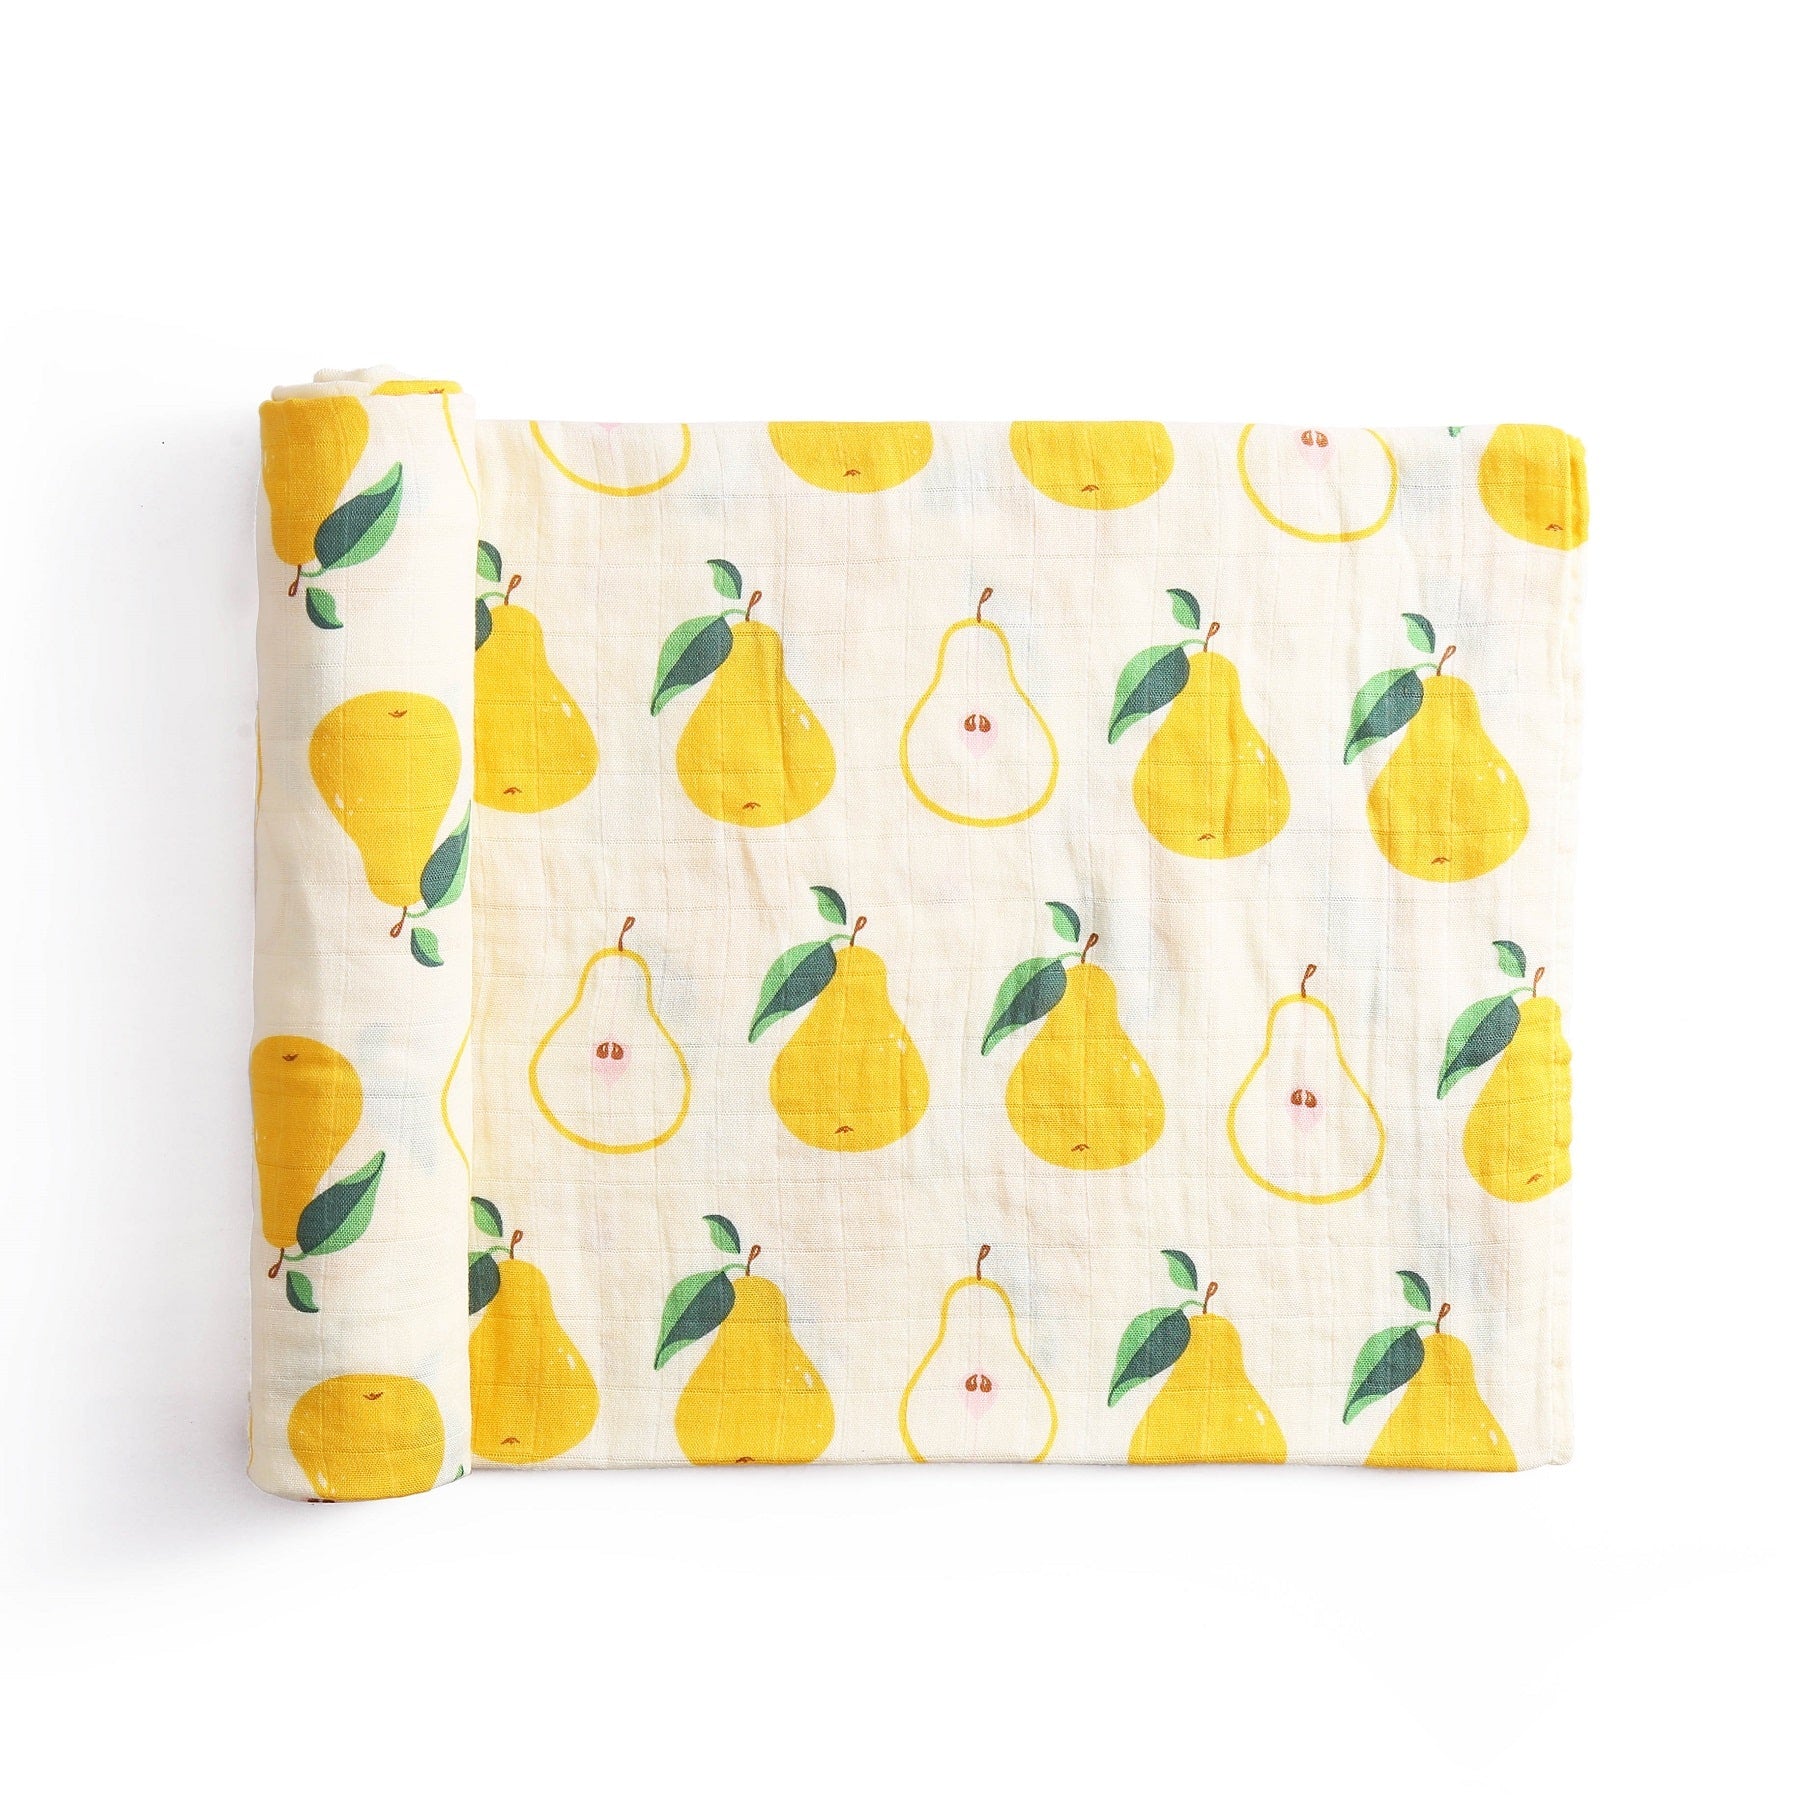 Golden Pear-adise Swaddle - Buy Baby Swaddles at Louie Meets Lola